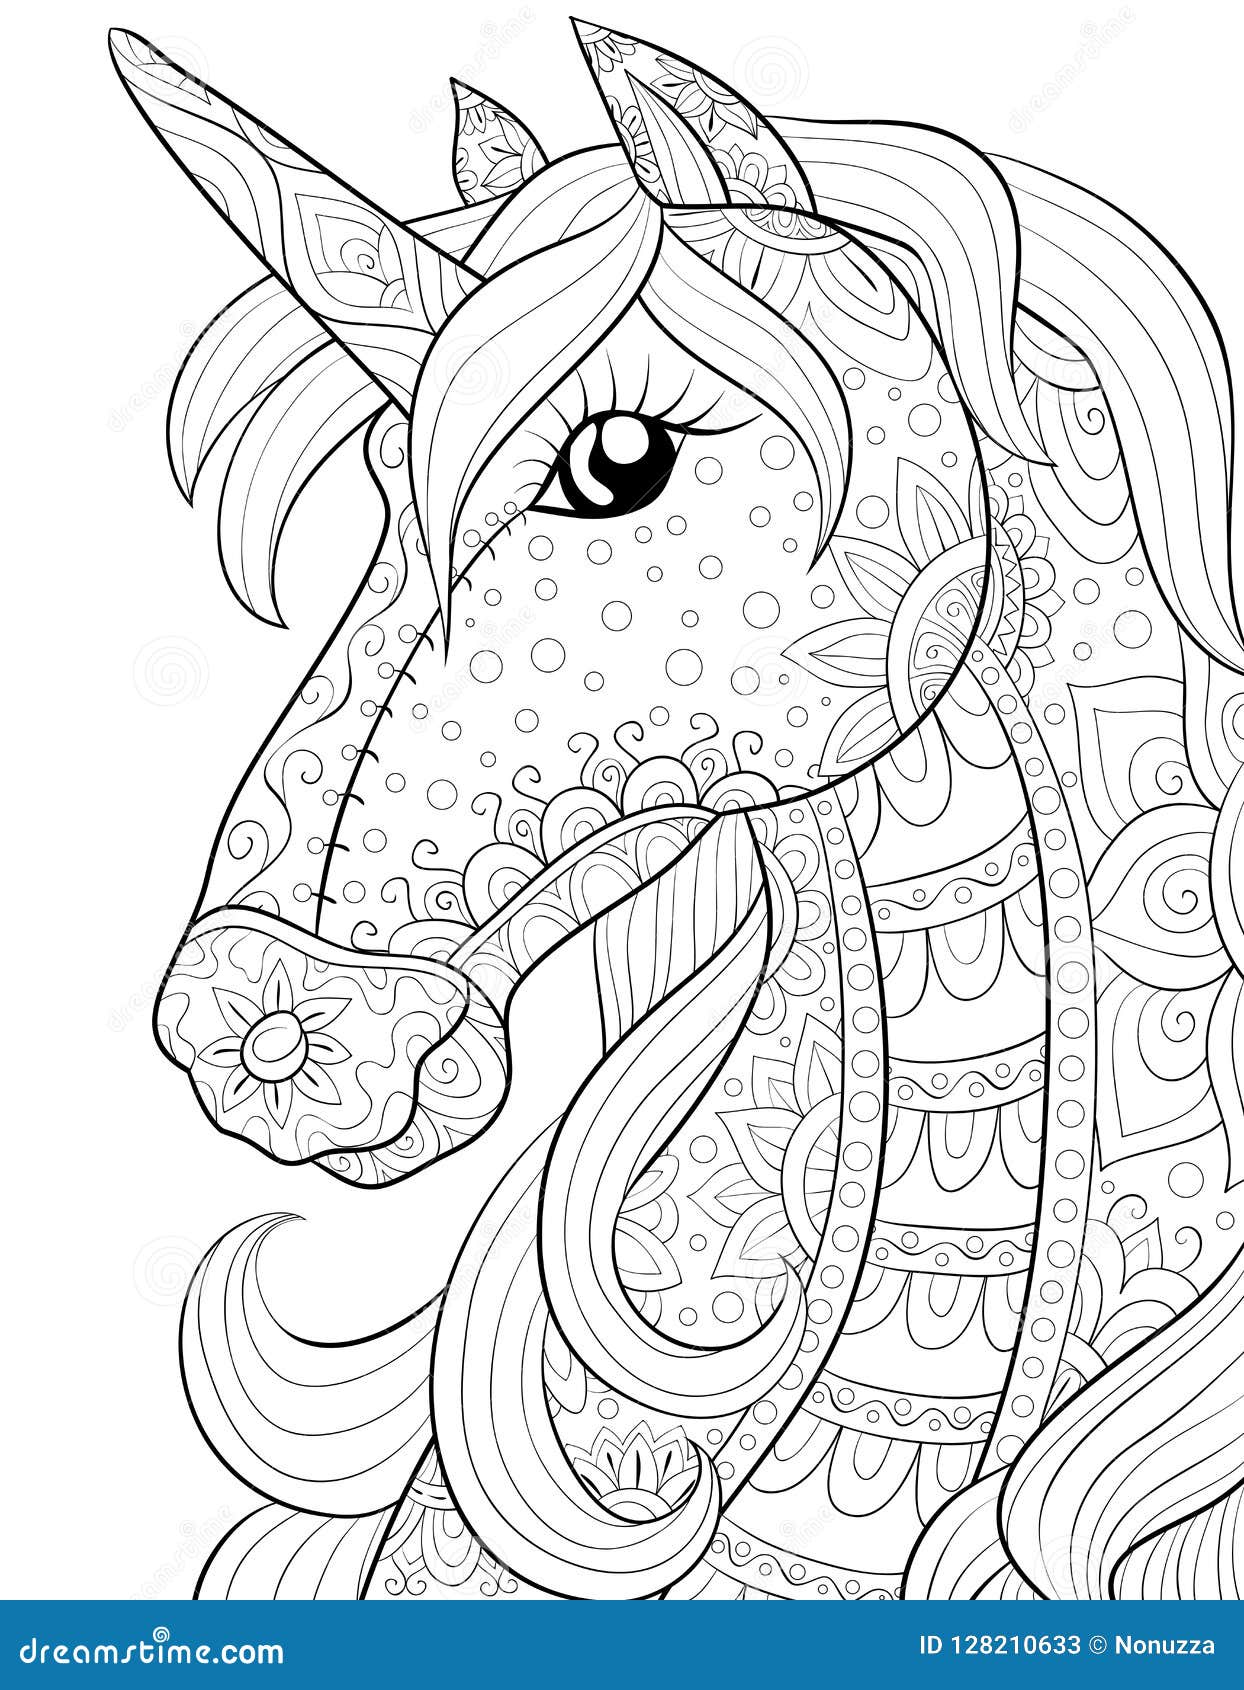 Adult Coloring Book,page a Cute Horse,unicorn Image for Relaxing ...